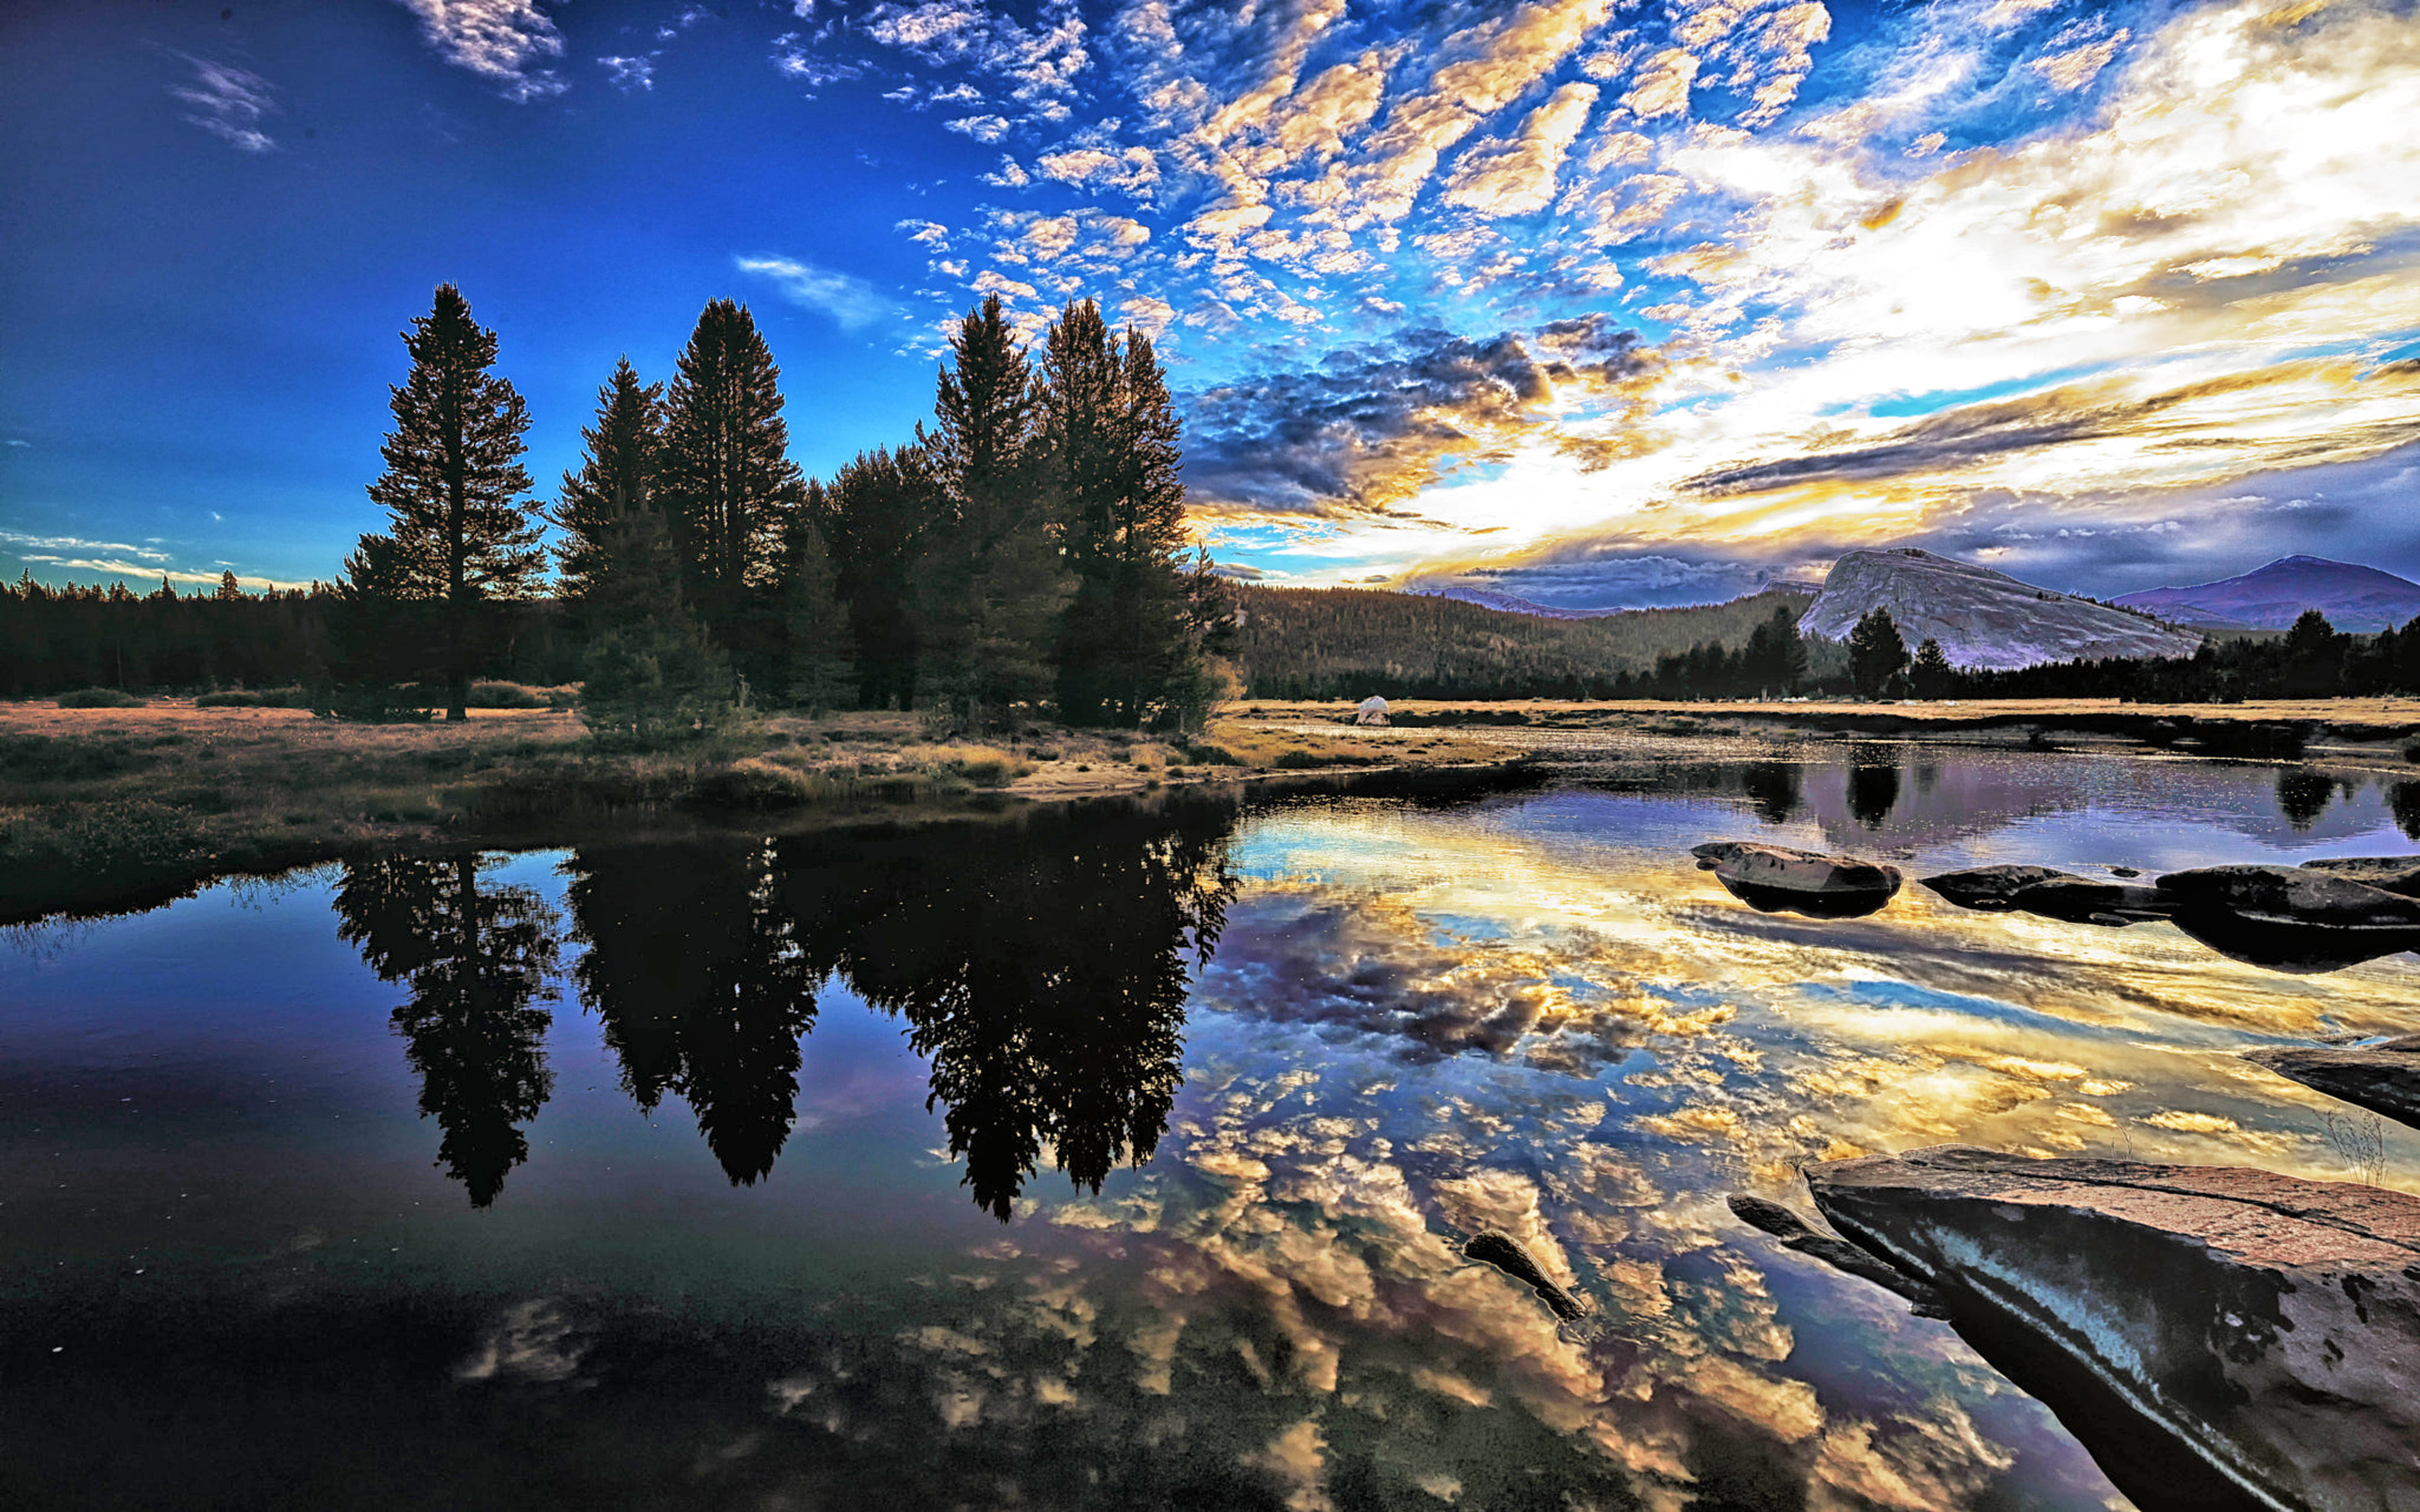 Tuolumne River County California United States 4k Ultra Hd Wallpaper For Desktop Laptop Tablet Mobile Phones And Tv 3840x2400 Wallpapers13 Com